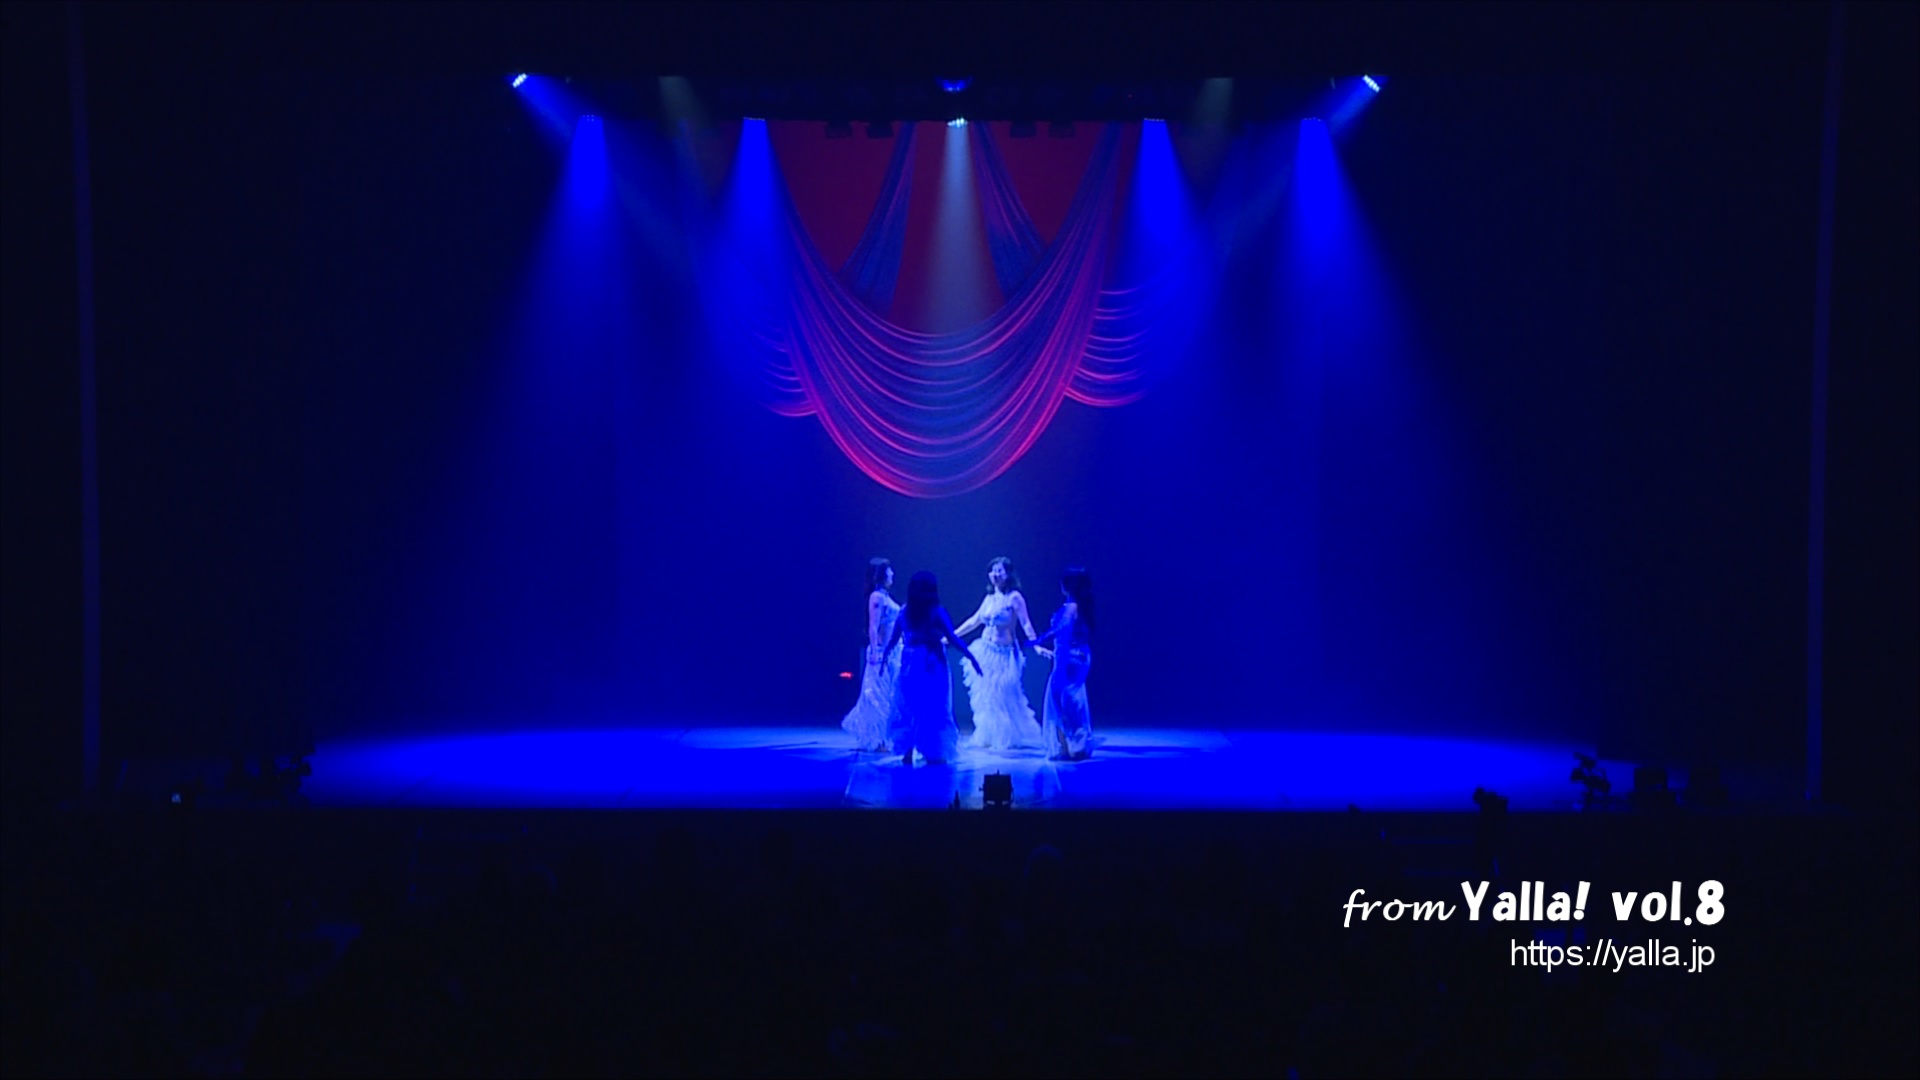 028-performancie-image-of-bellydance-for-yalla-8th-live-stage